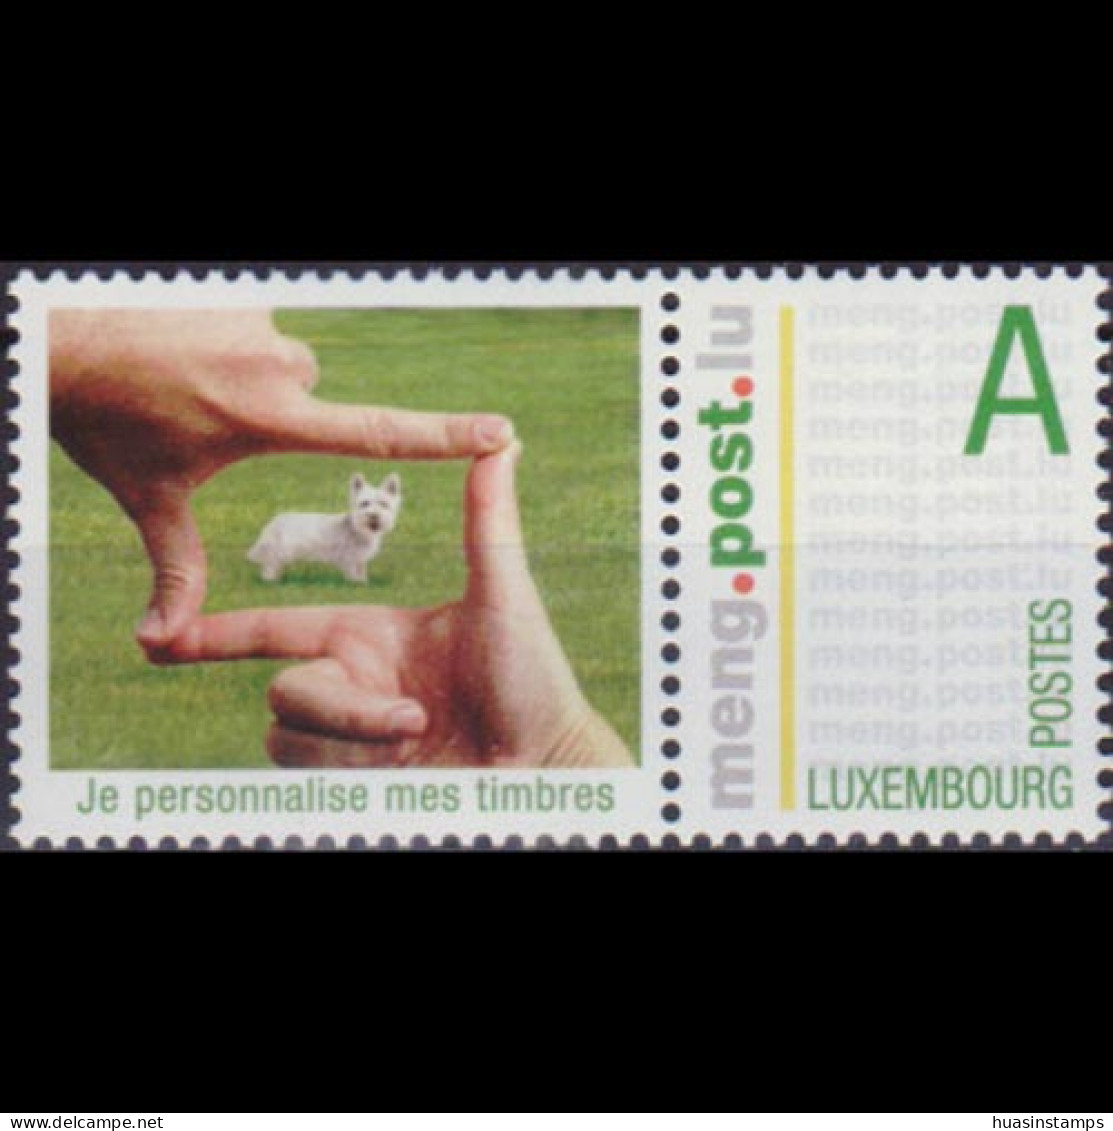 LUXEMBOURG 2006 - Scott# 1185 Stamp Website Set Of 1 MNH - Unused Stamps